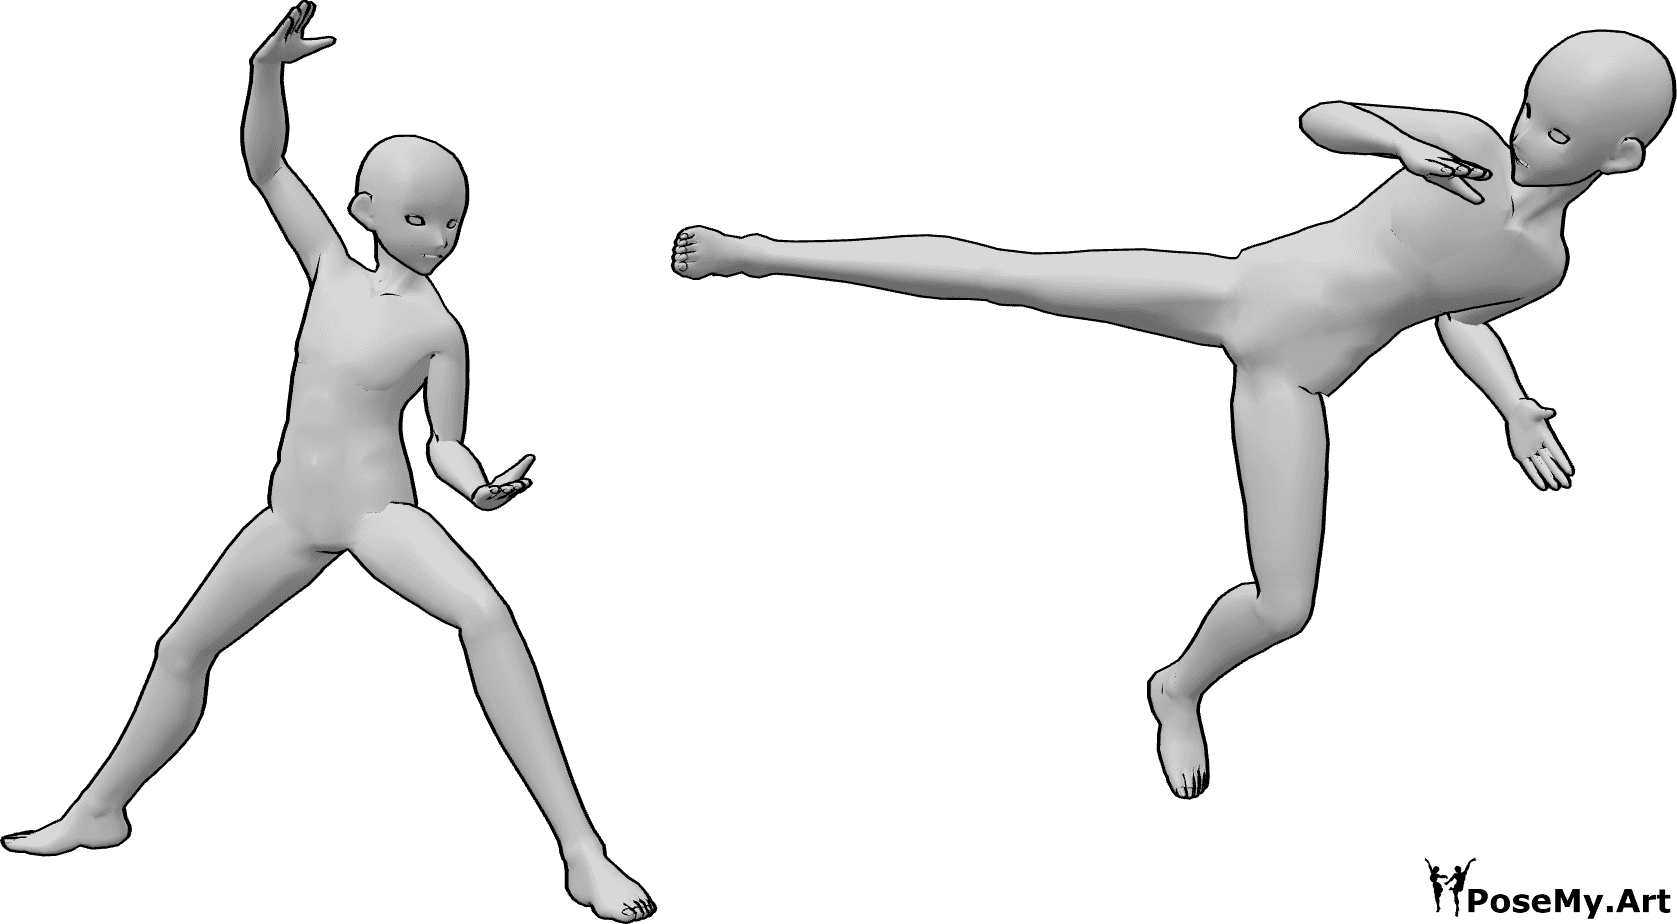 Pose Reference- Anime ninja fighting pose - Two anime males are fighting, one of them is doing a side kick, anime ninja fight pose